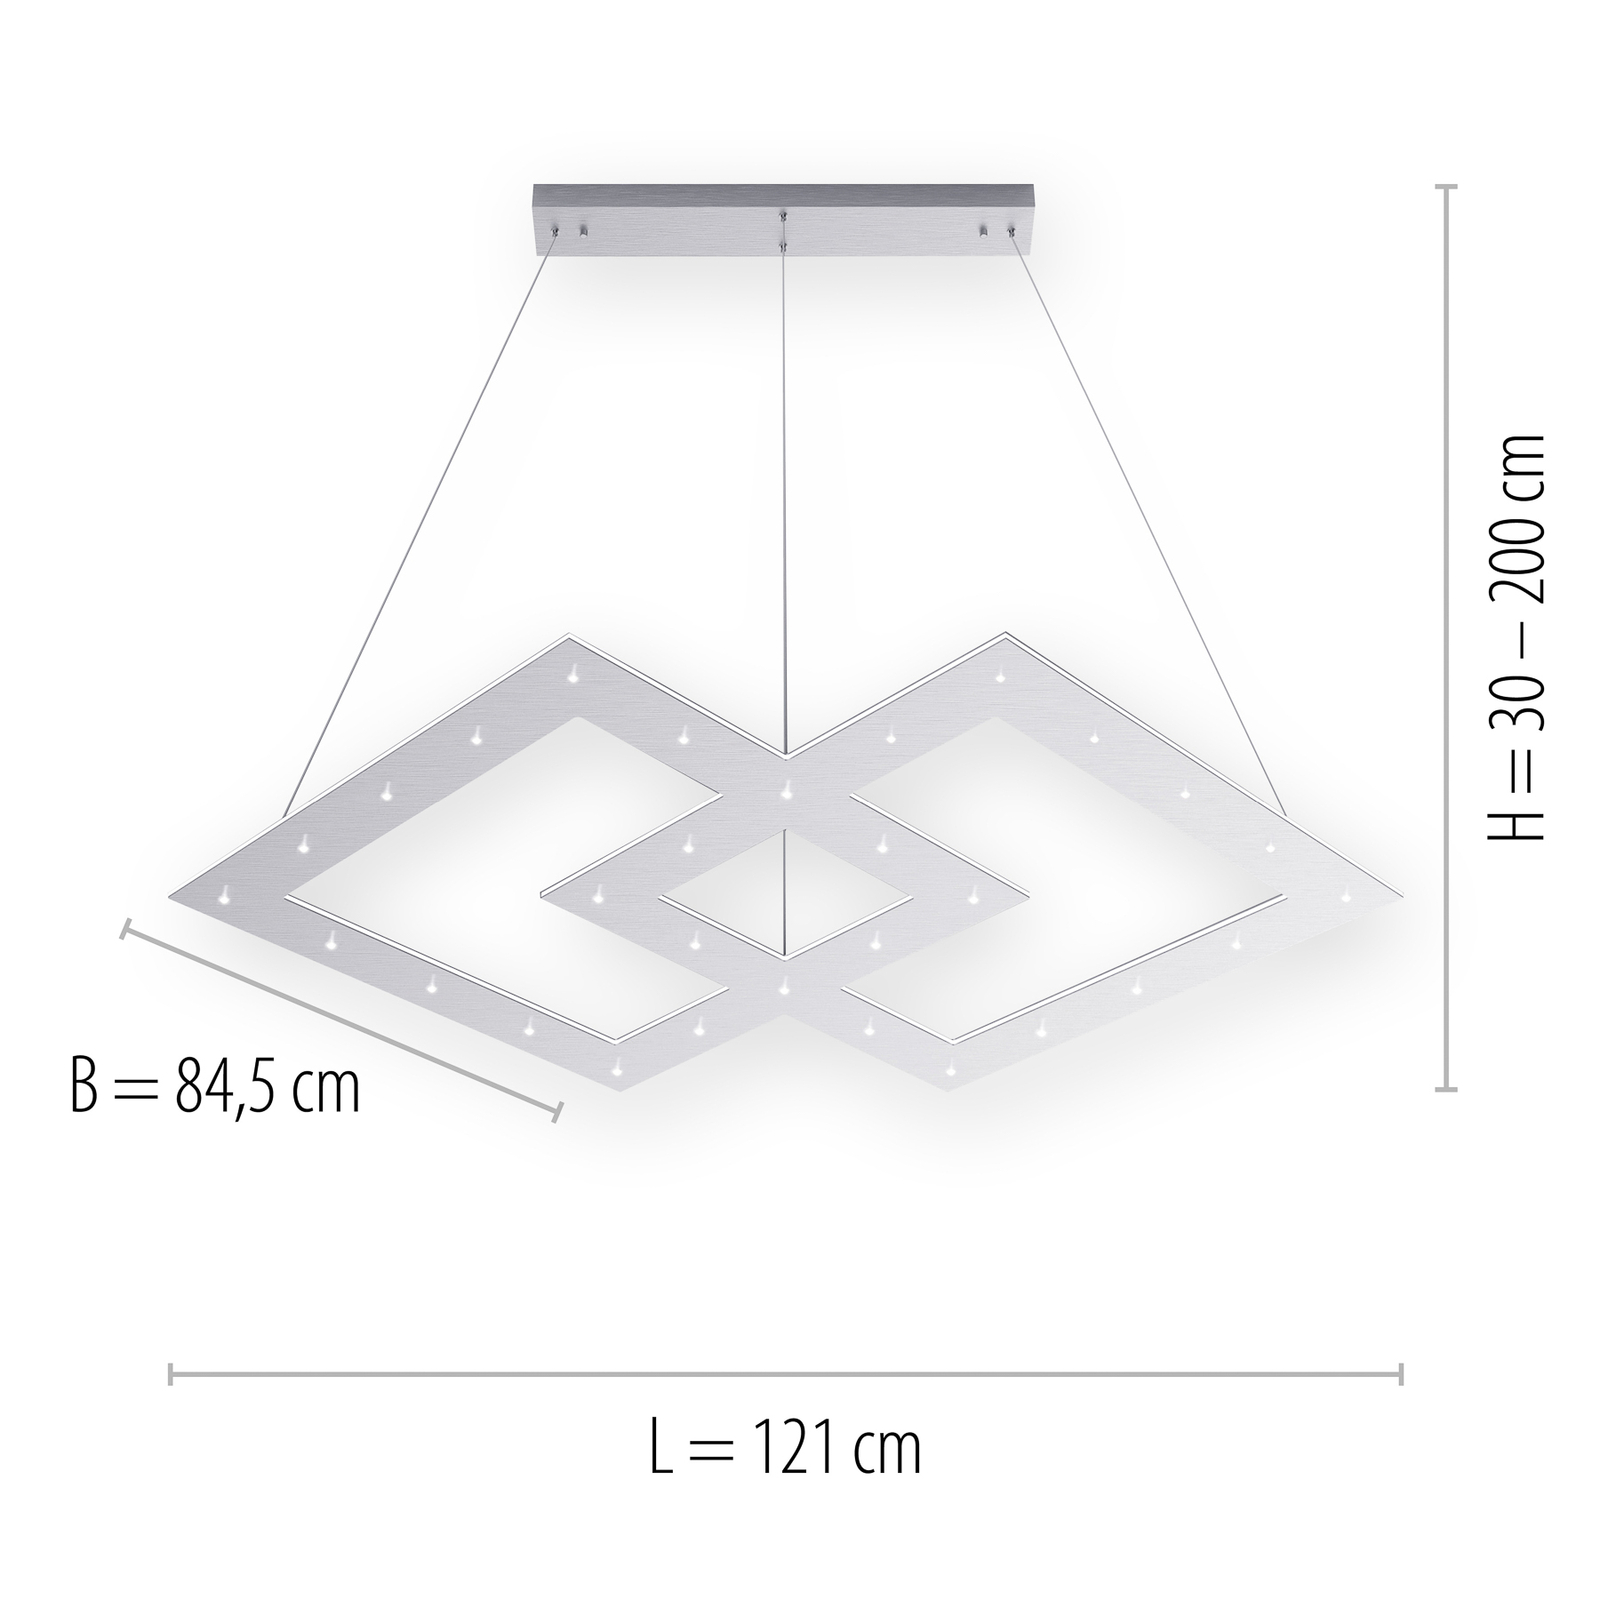 PURE Cosmo LED hanging light 121 x 84.5 cm